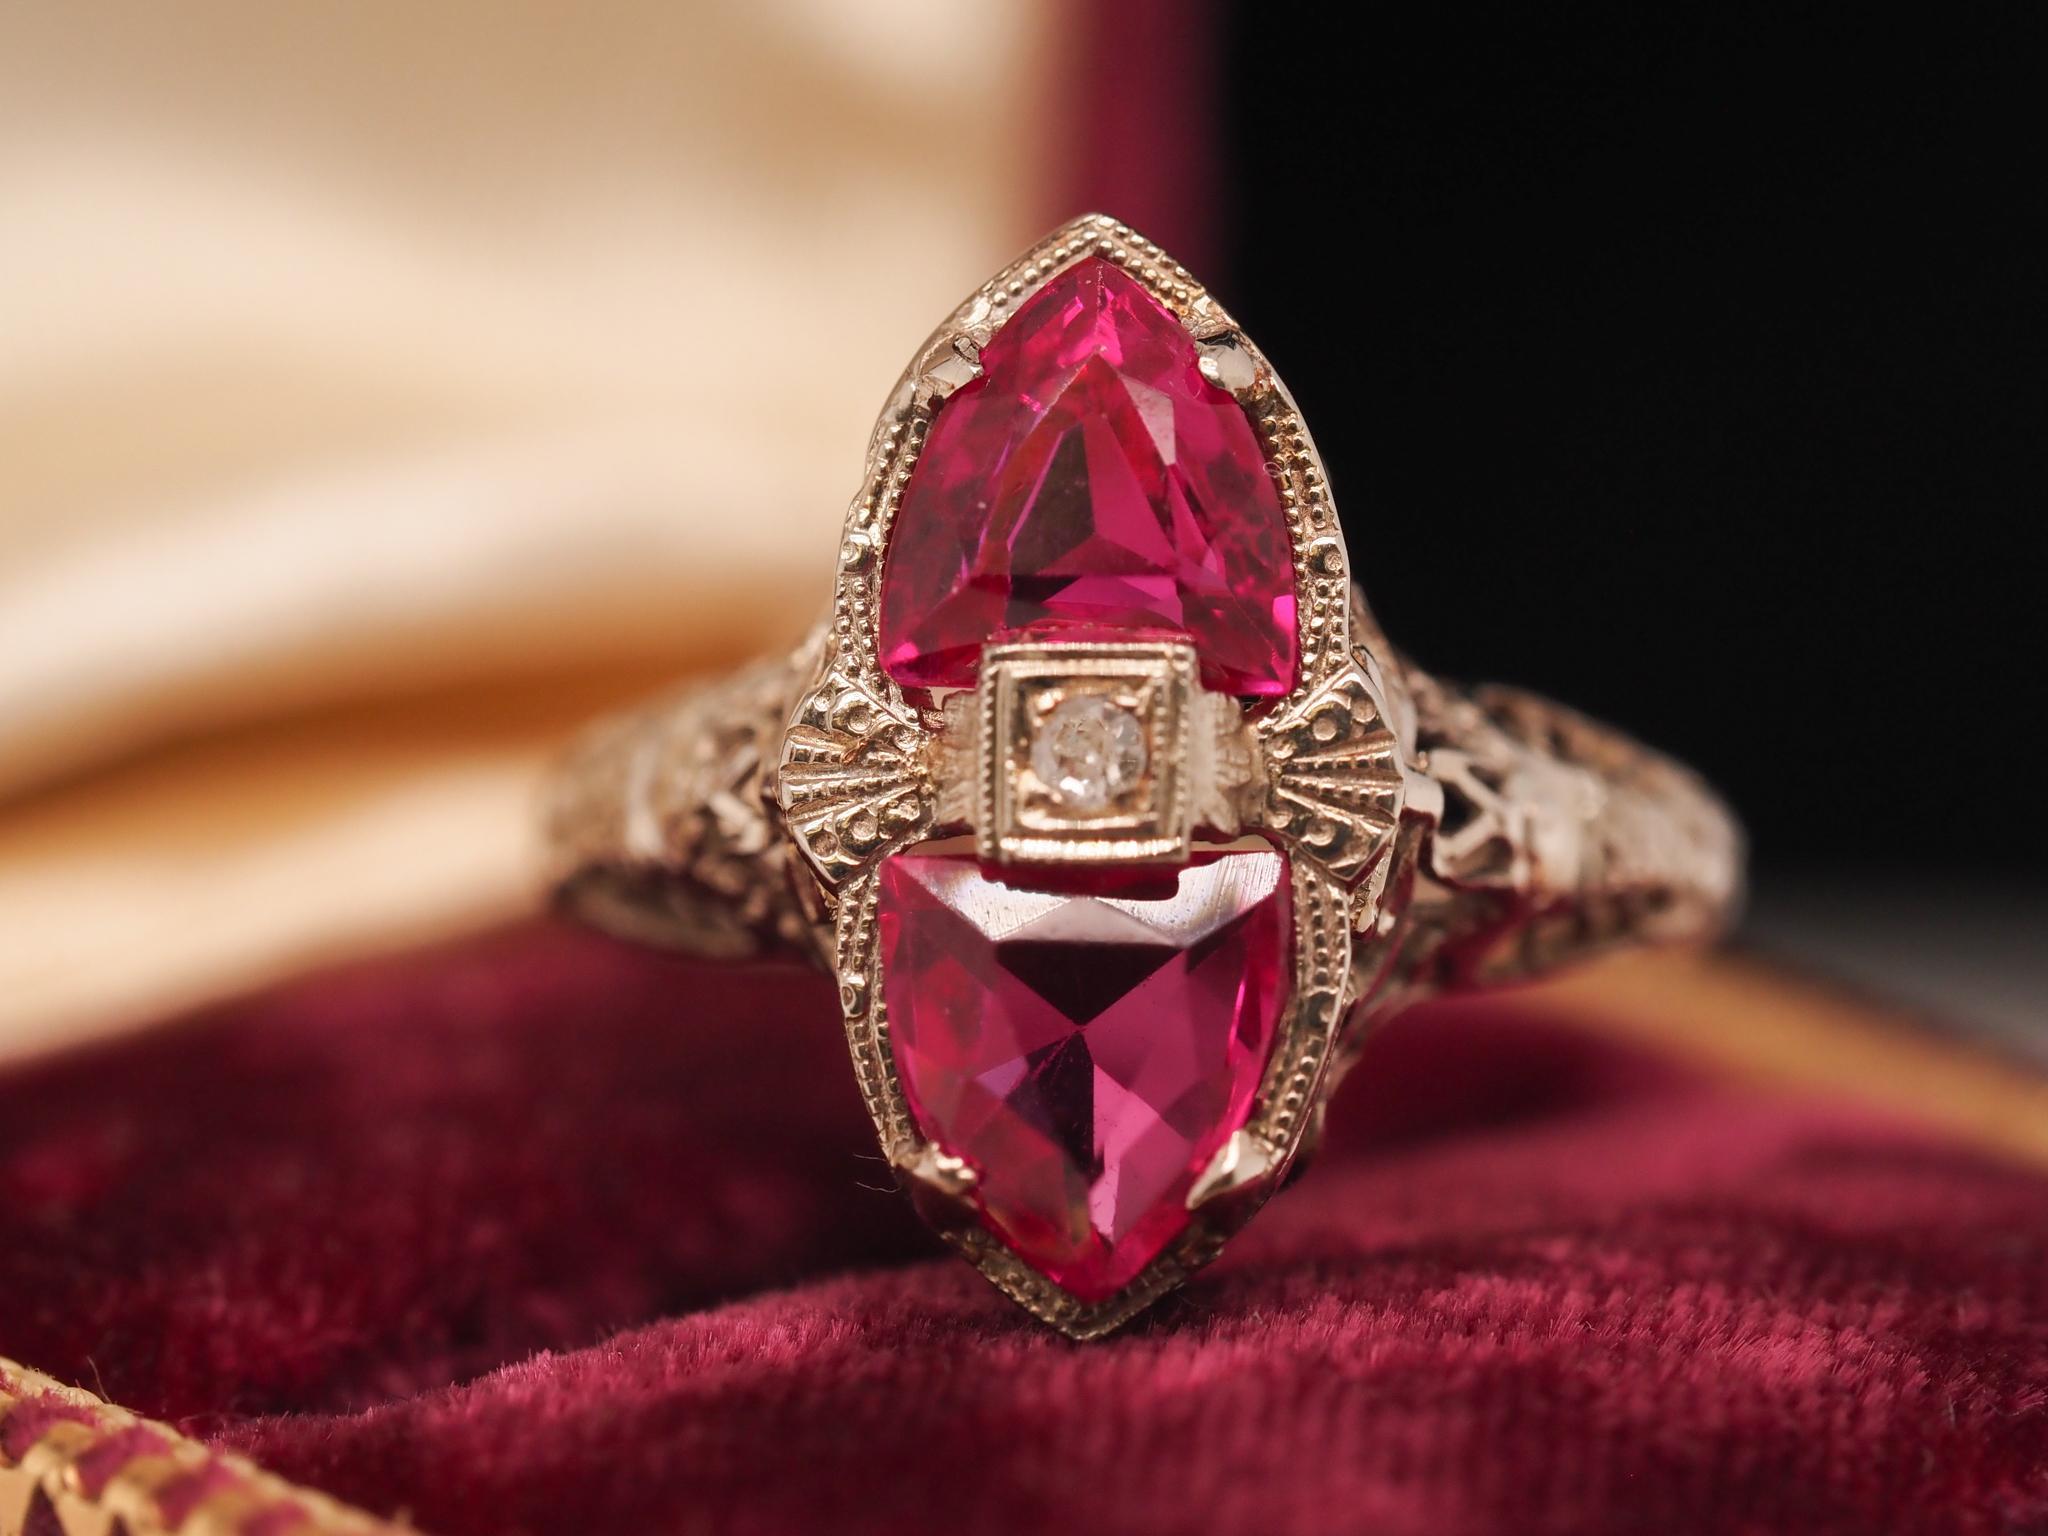 Year: 1930s
Item Details:
Ring Size: 8 (Sizable)
Metal Type: 18k white gold [Hallmarked, and Tested]
Weight: 2.7 grams
Ruby Details: Synthetic, Intense Pink-Red, 2 carat total weight
Band Width: 2mm
Condition: Excellent
Era: Art Deco